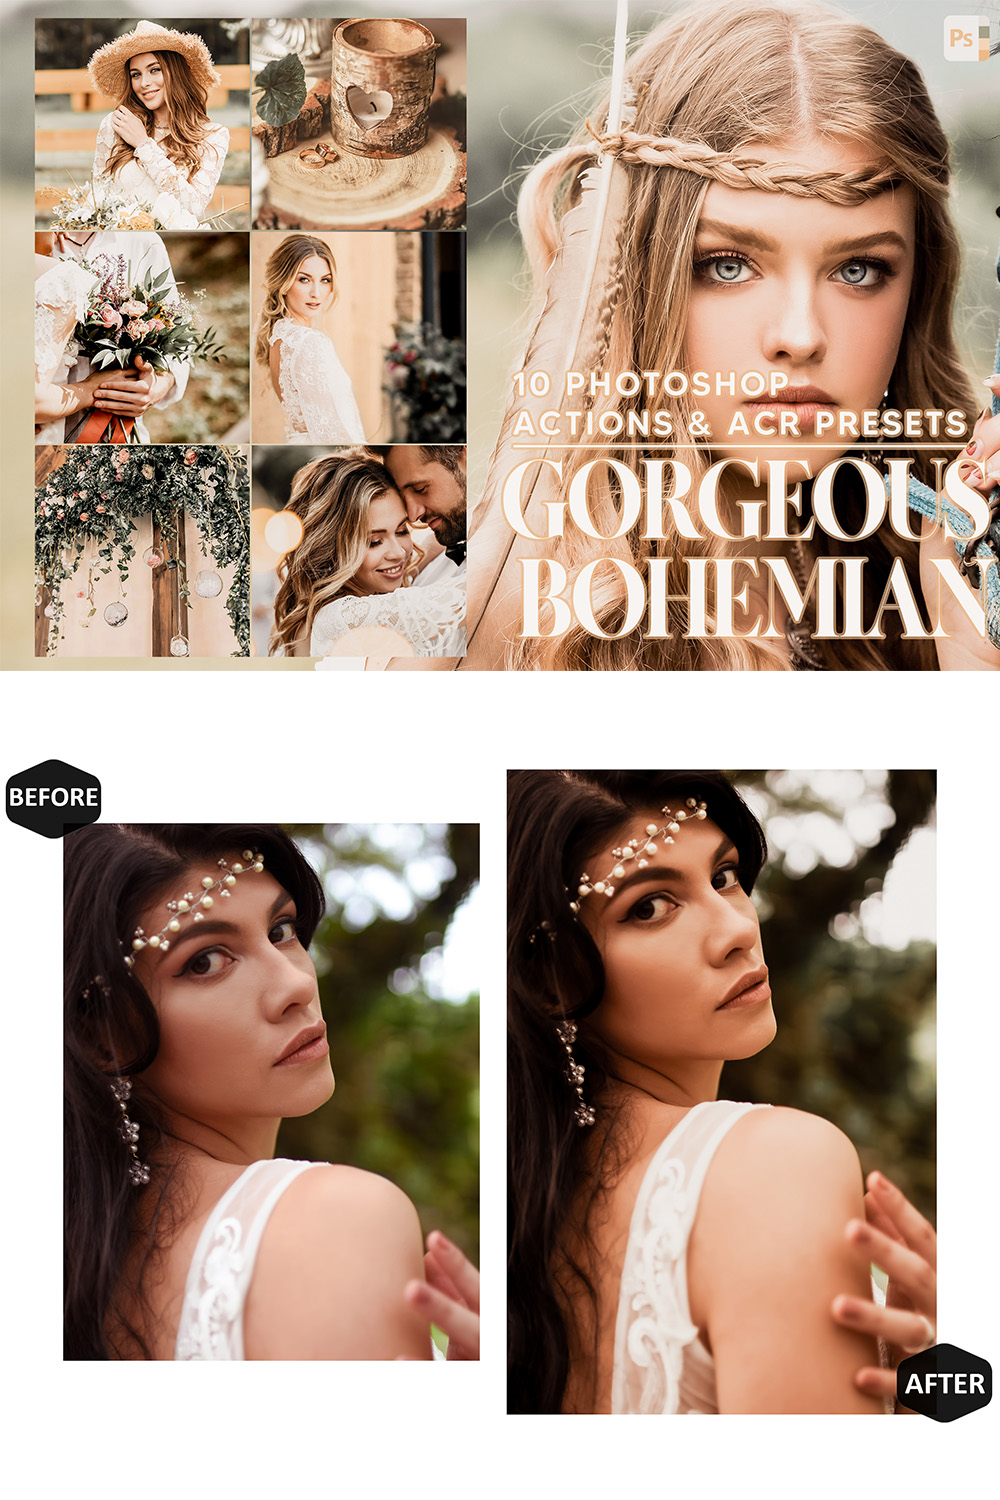 10 Photoshop Actions, Gorgeous Bohemian Ps Action, Bright Wedding ACR Preset, Romantic Ps Filter, Portrait And Lifestyle Theme For Instagram, Blogger pinterest preview image.